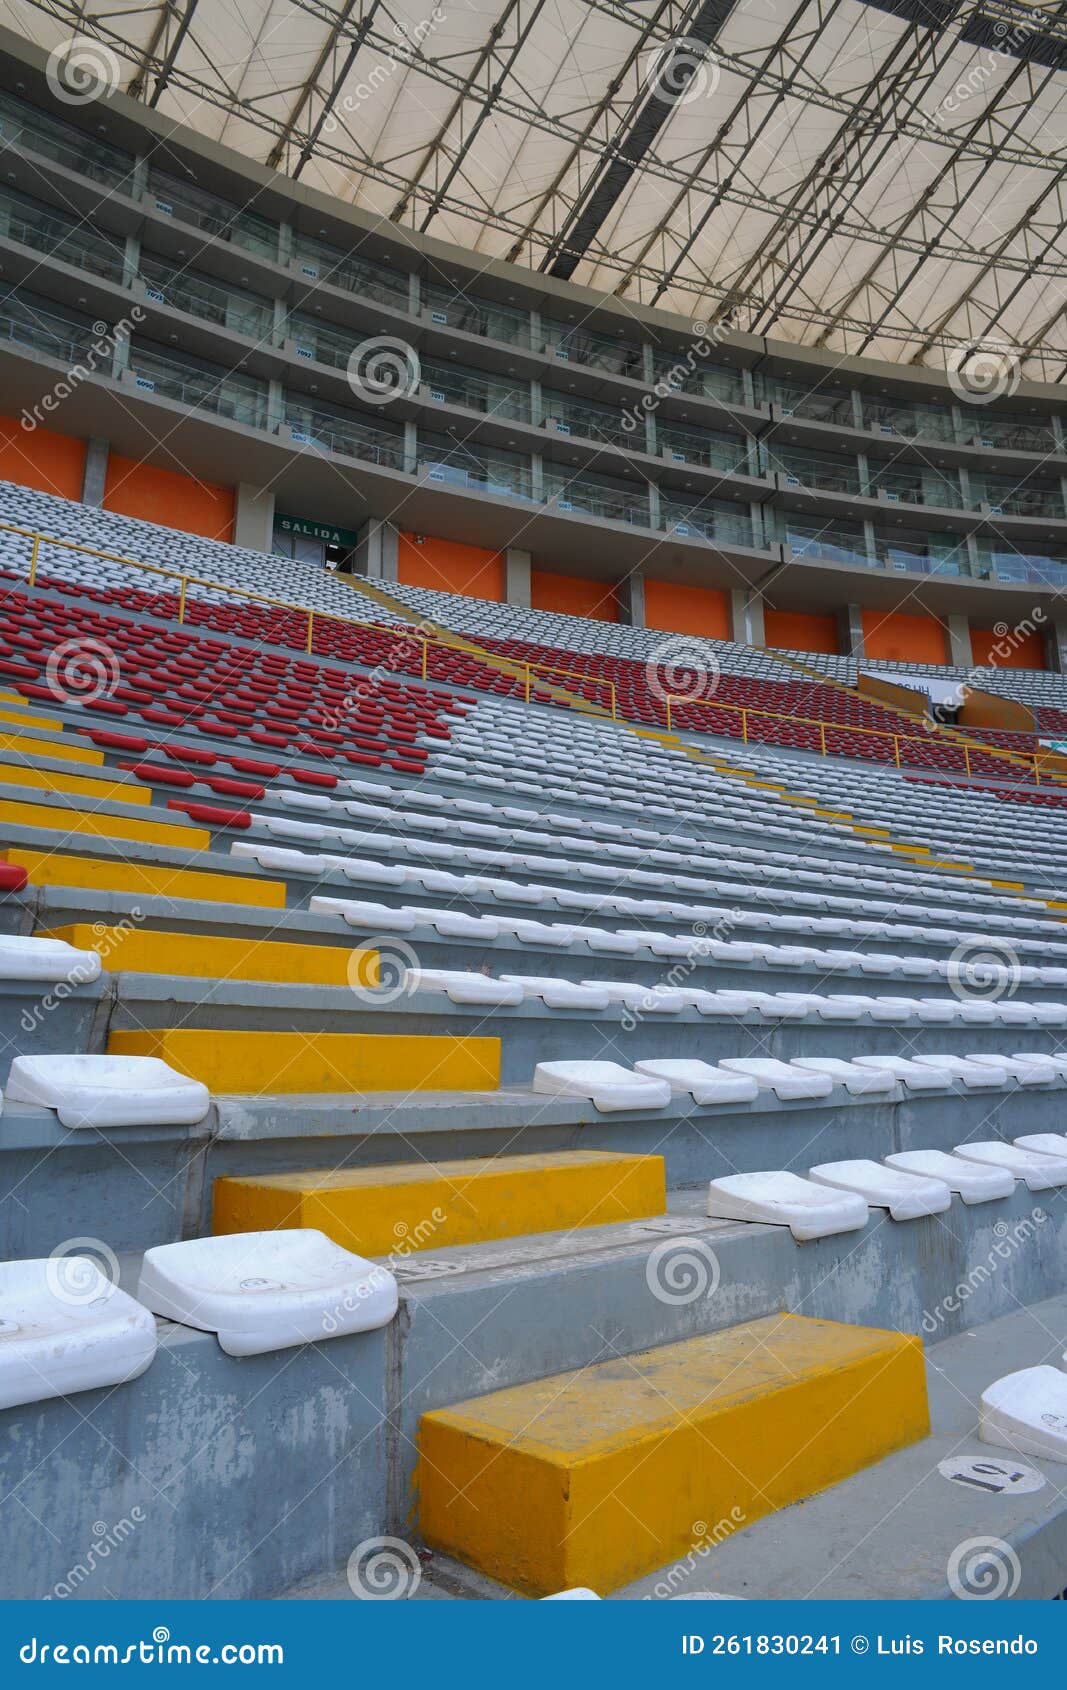 rows of empty orange and white seats in the sports complex of the estadio nacional - soccer stadium - in lima peru